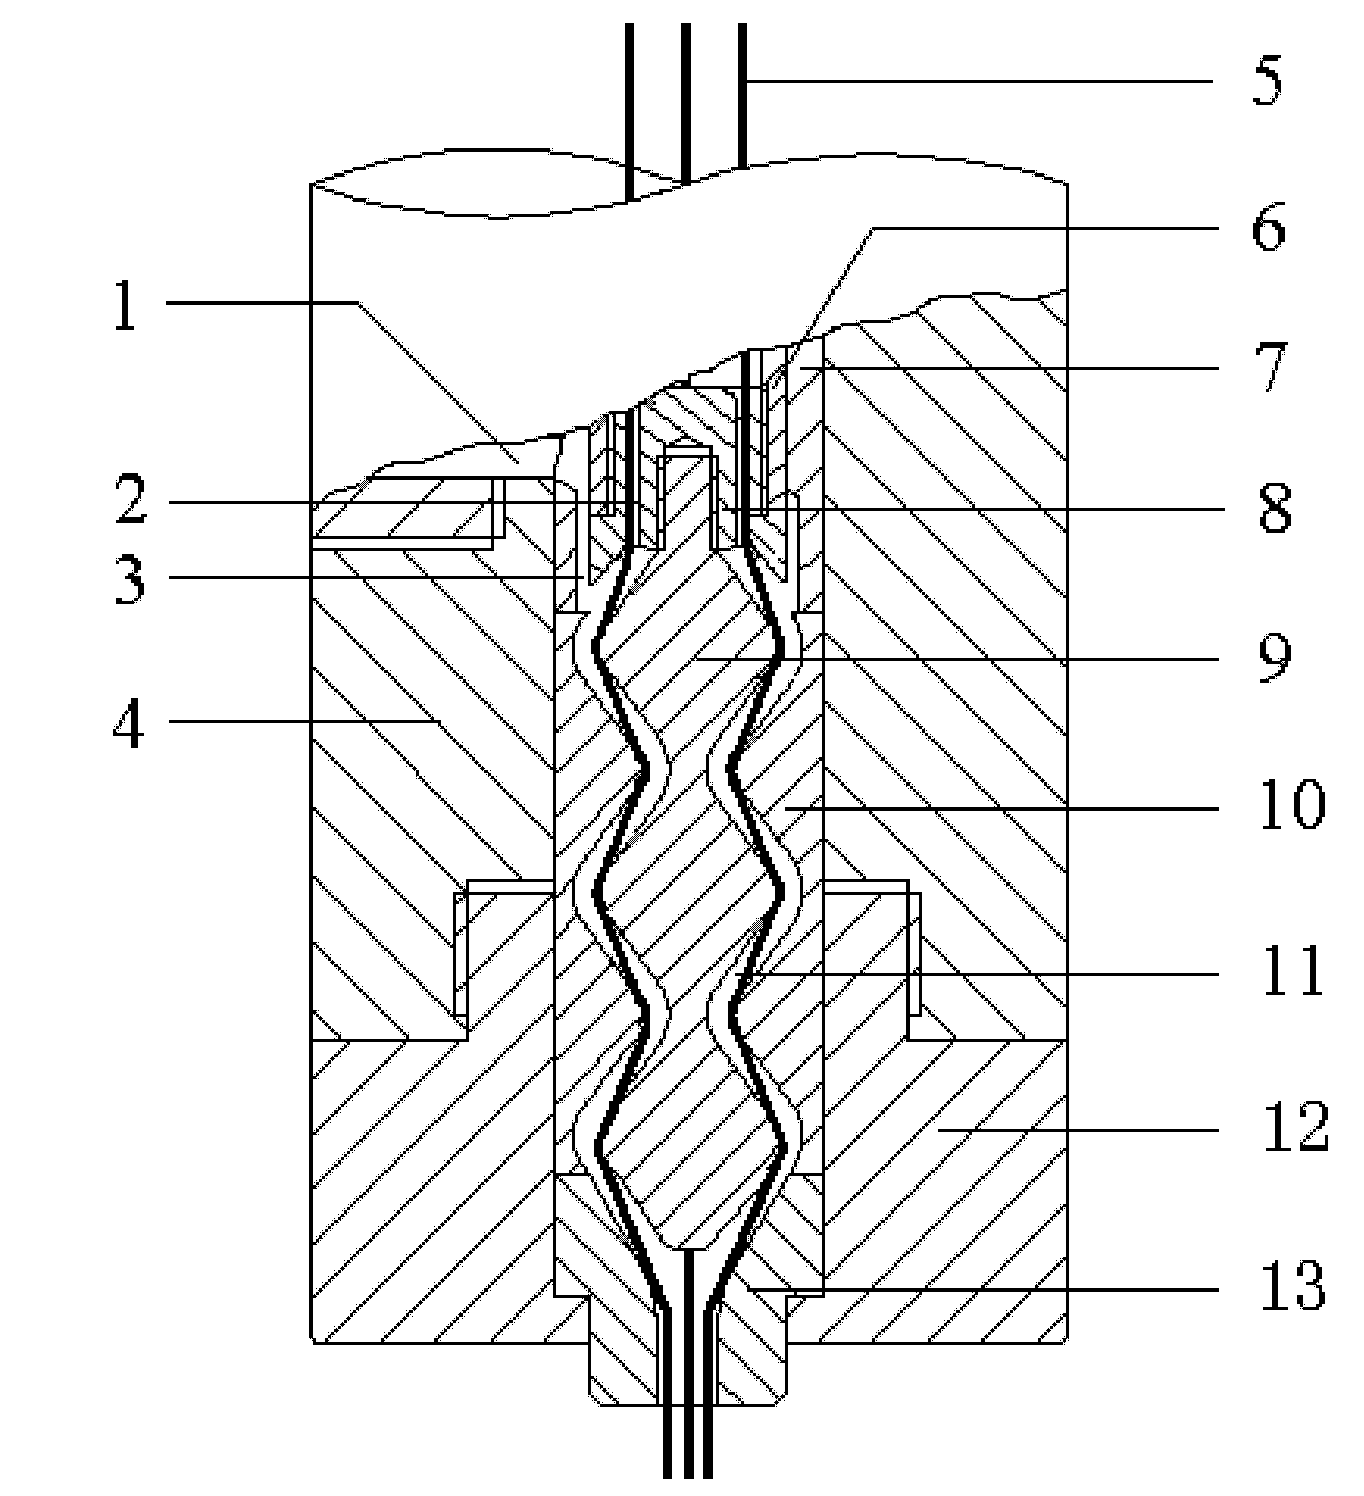 Impregnation mold of continuous/fiber reinforced thermoplastic composite material, and use method thereof